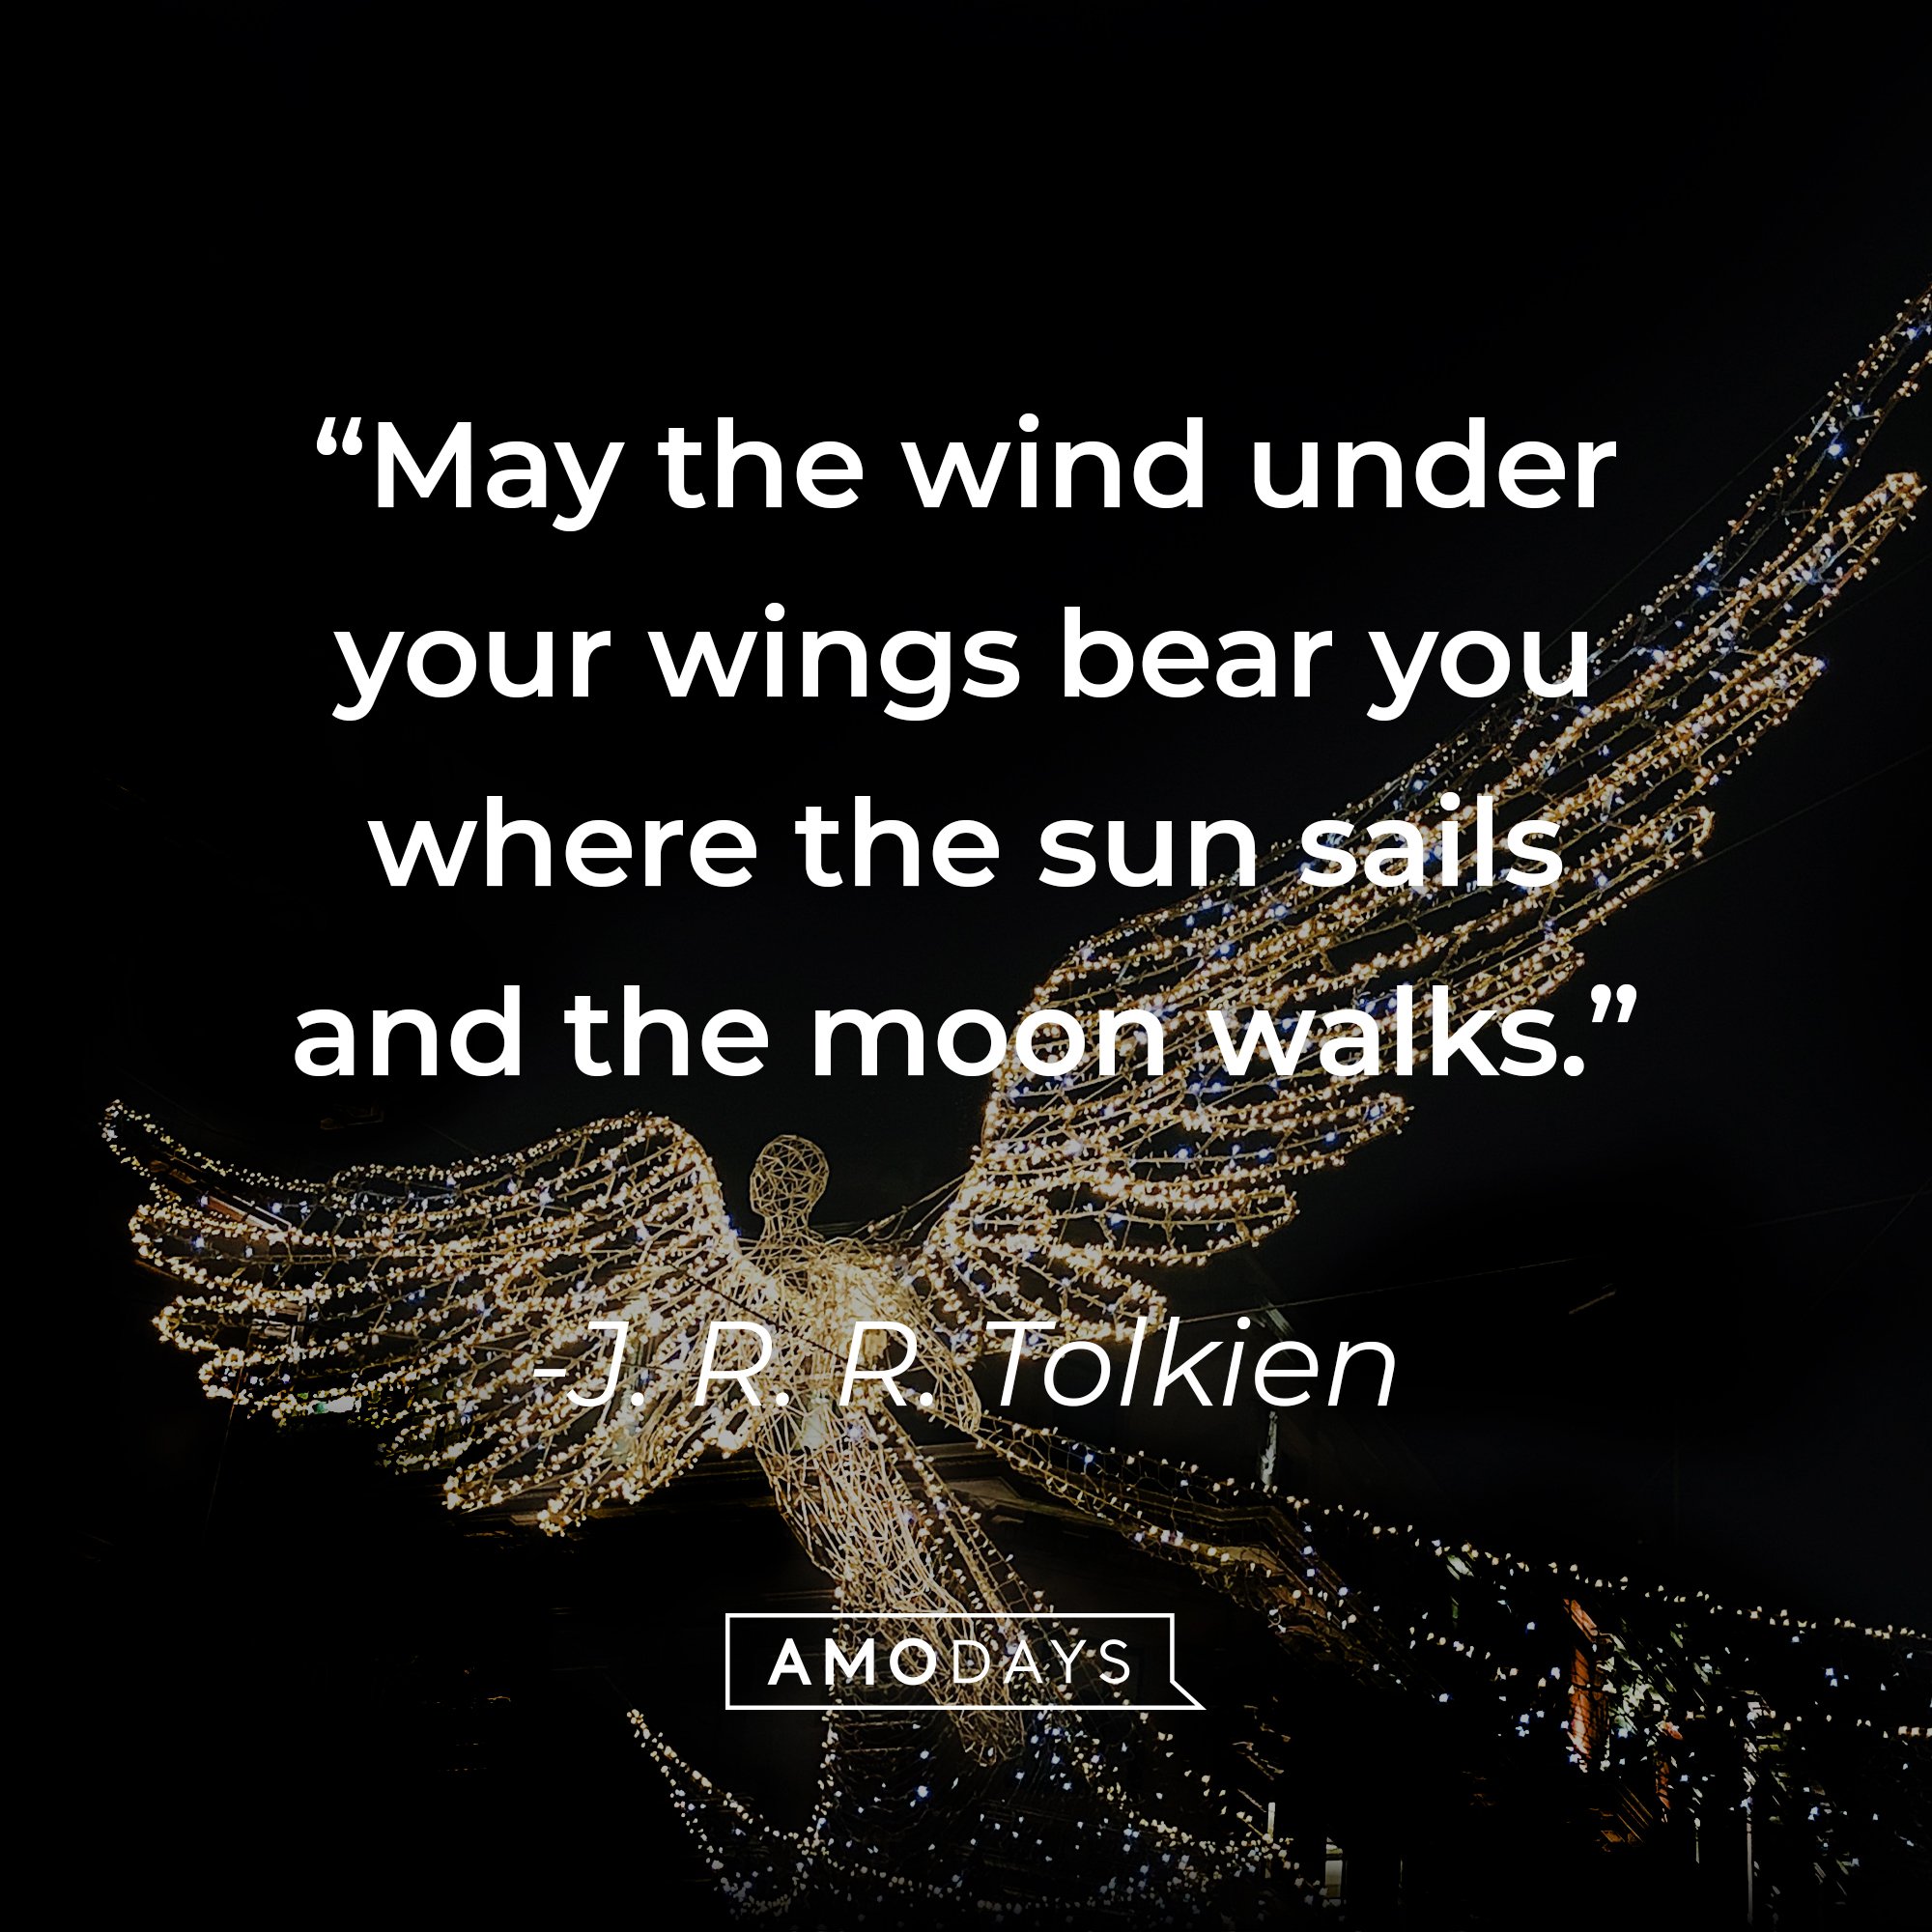 J. R. R. Tolkien's quote: "May the wind under your wings bear you where the sun sails and the moon walks." | Image: AmoDays